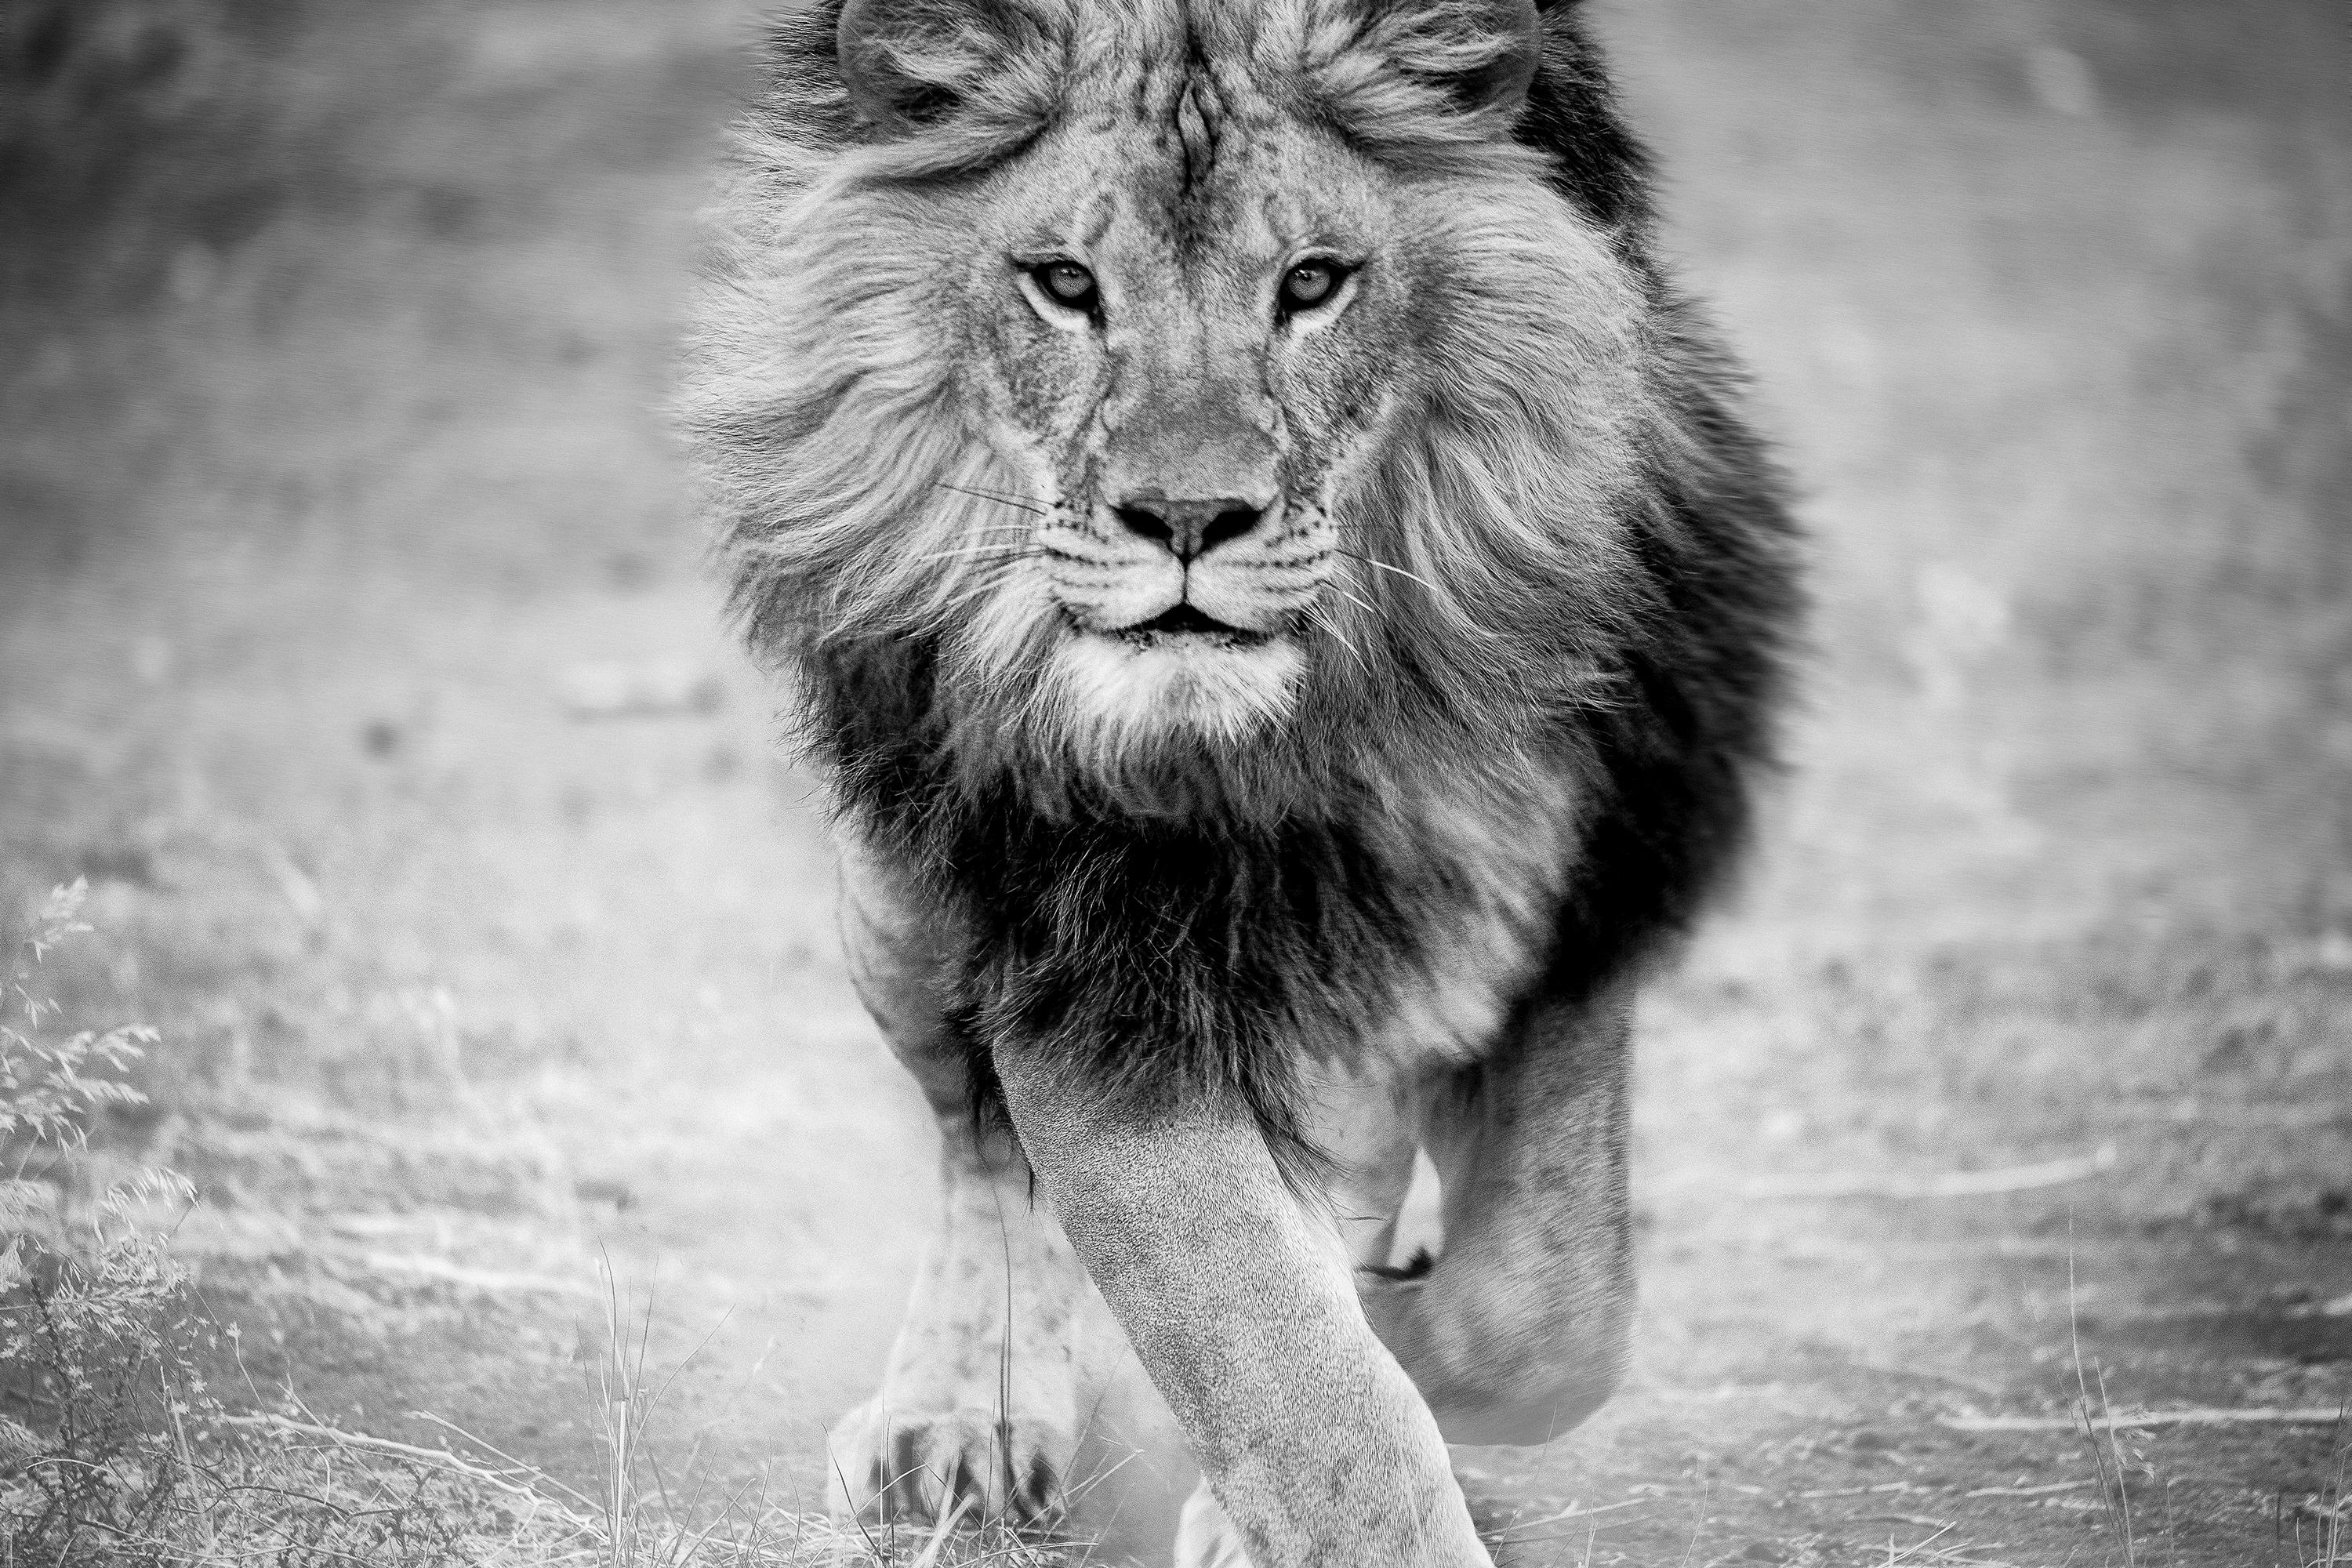 Shane Russeck Black and White Photograph - Black and White Lion Photography, Panthera Leo - 40x60, Lion Photograph Unsigned